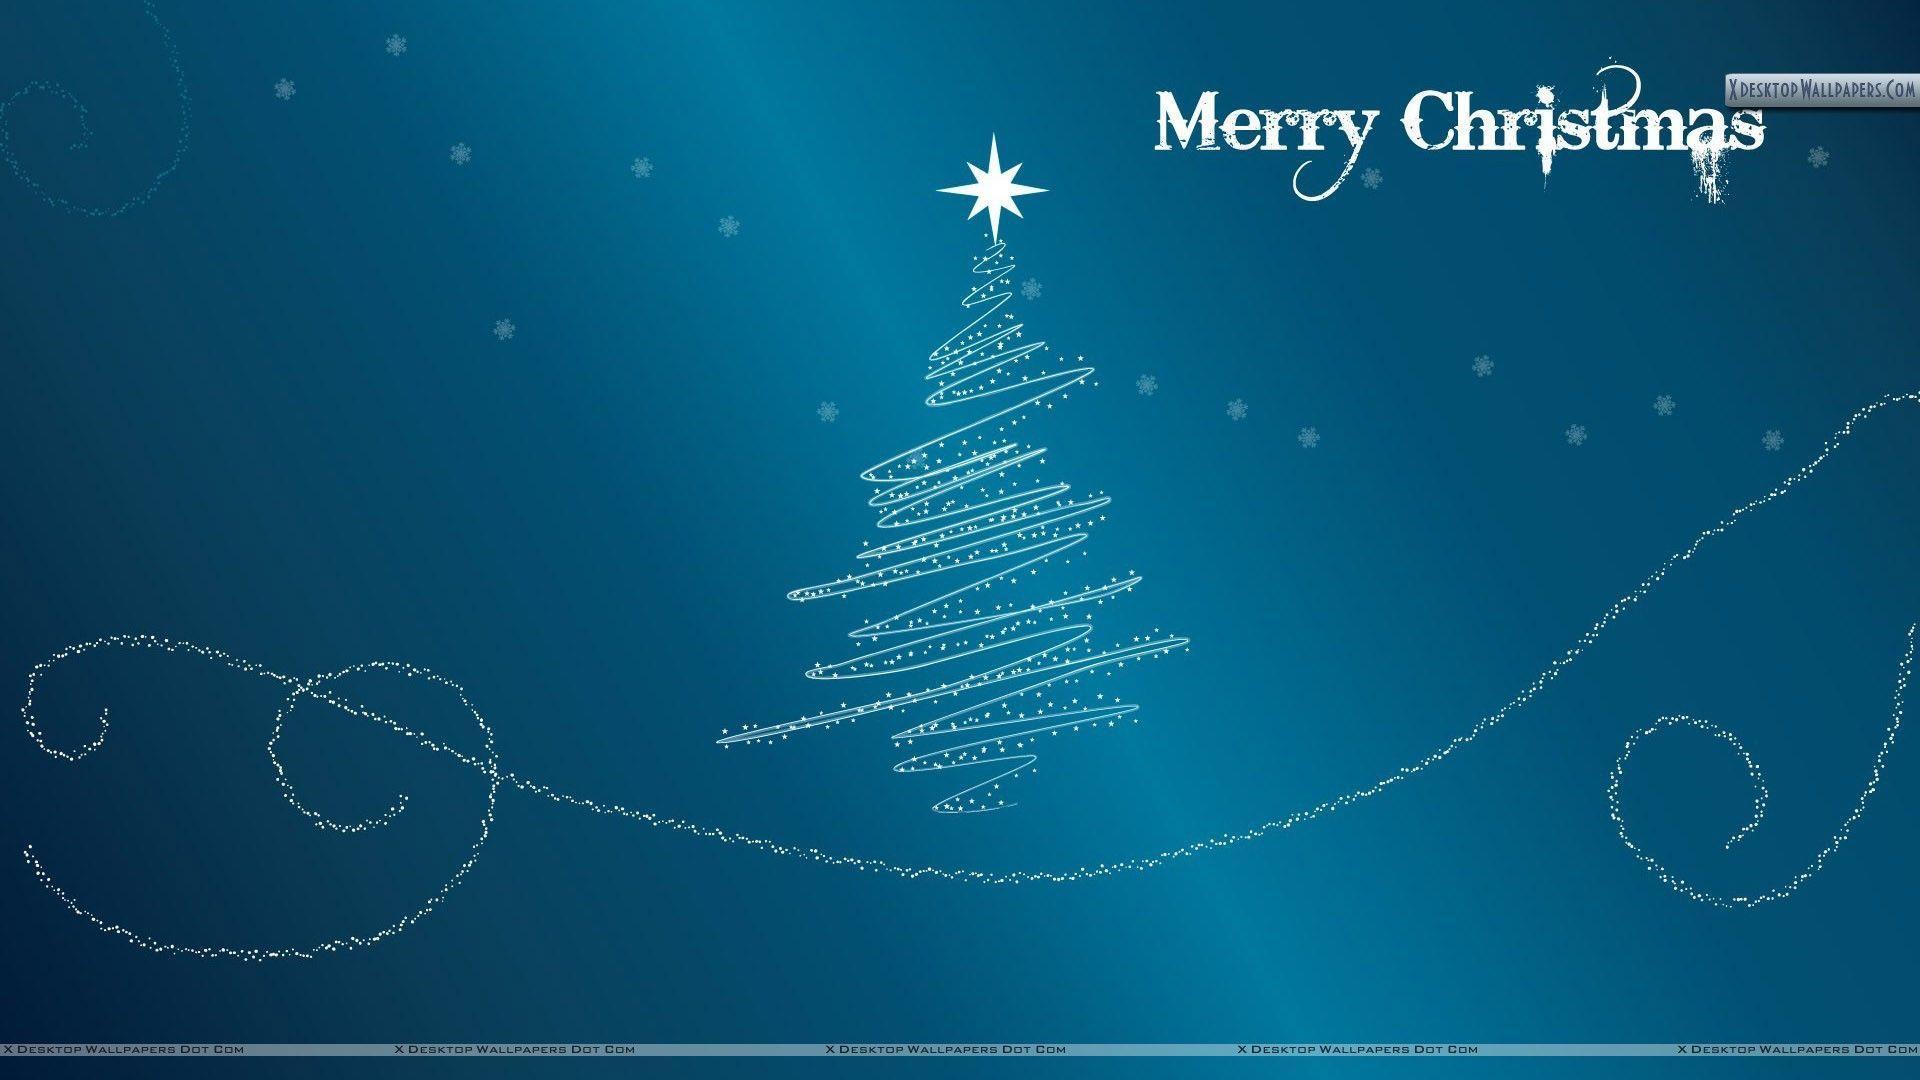 Merry Christmas With Blue Background Wallpaper